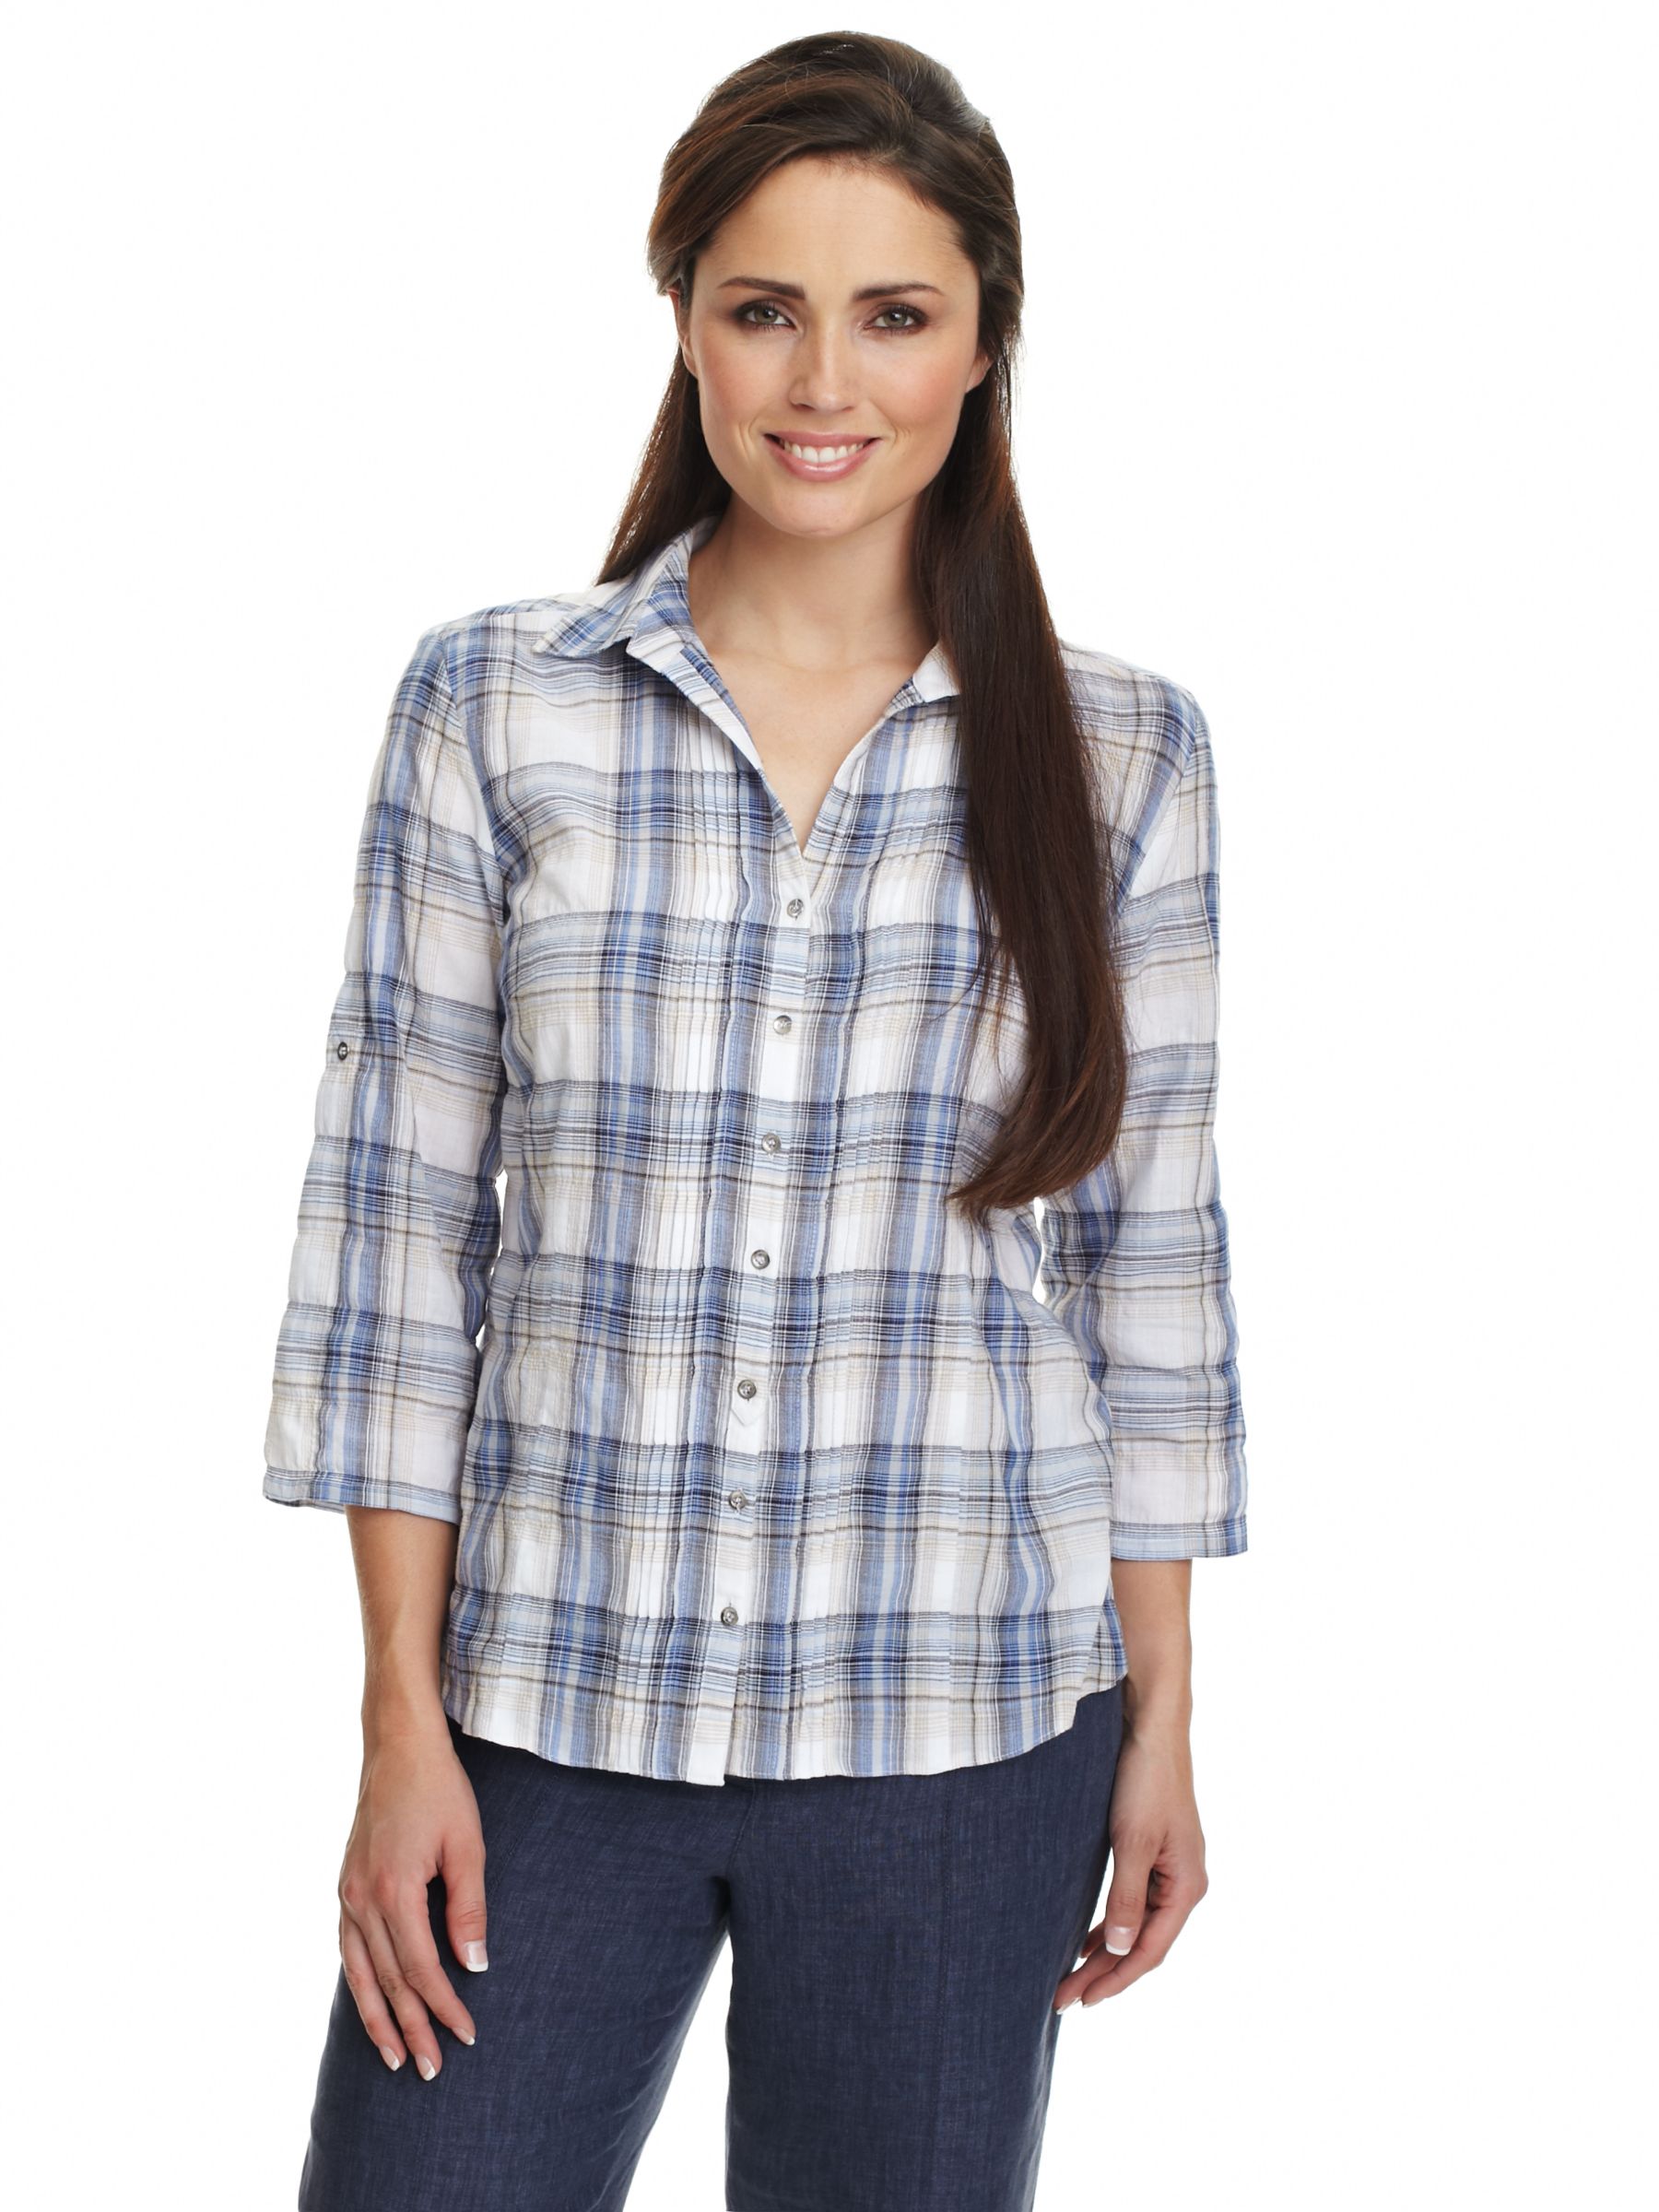 Gerry Weber Cheese Cloth Check Blouse, Blue - review, compare prices ...